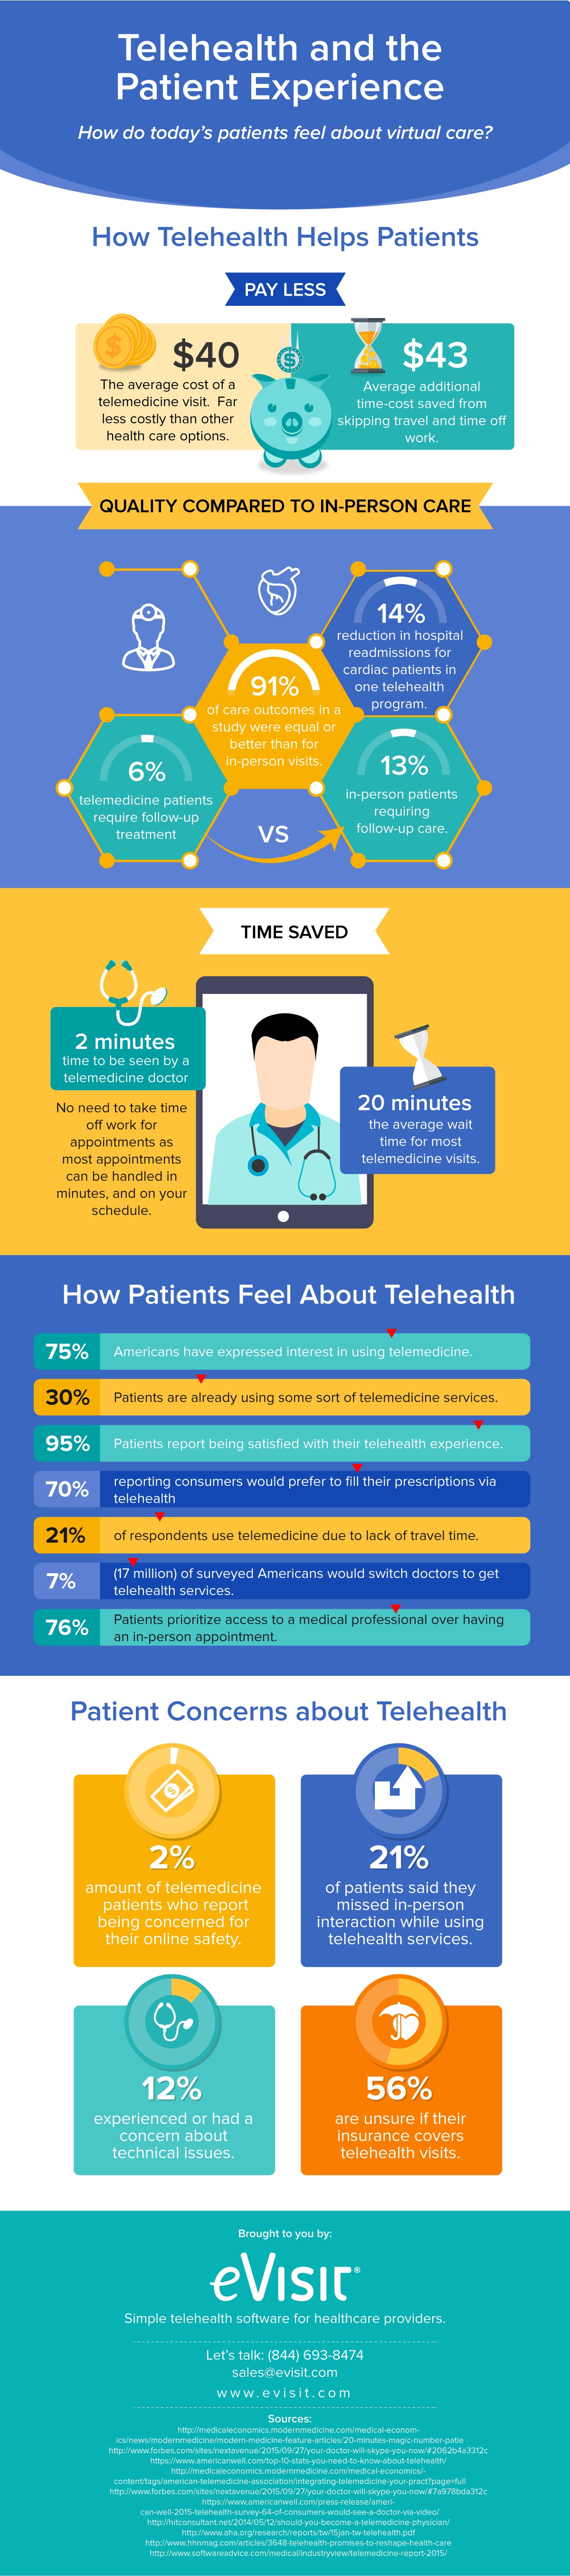 Telehealth Patient Experience Infographic